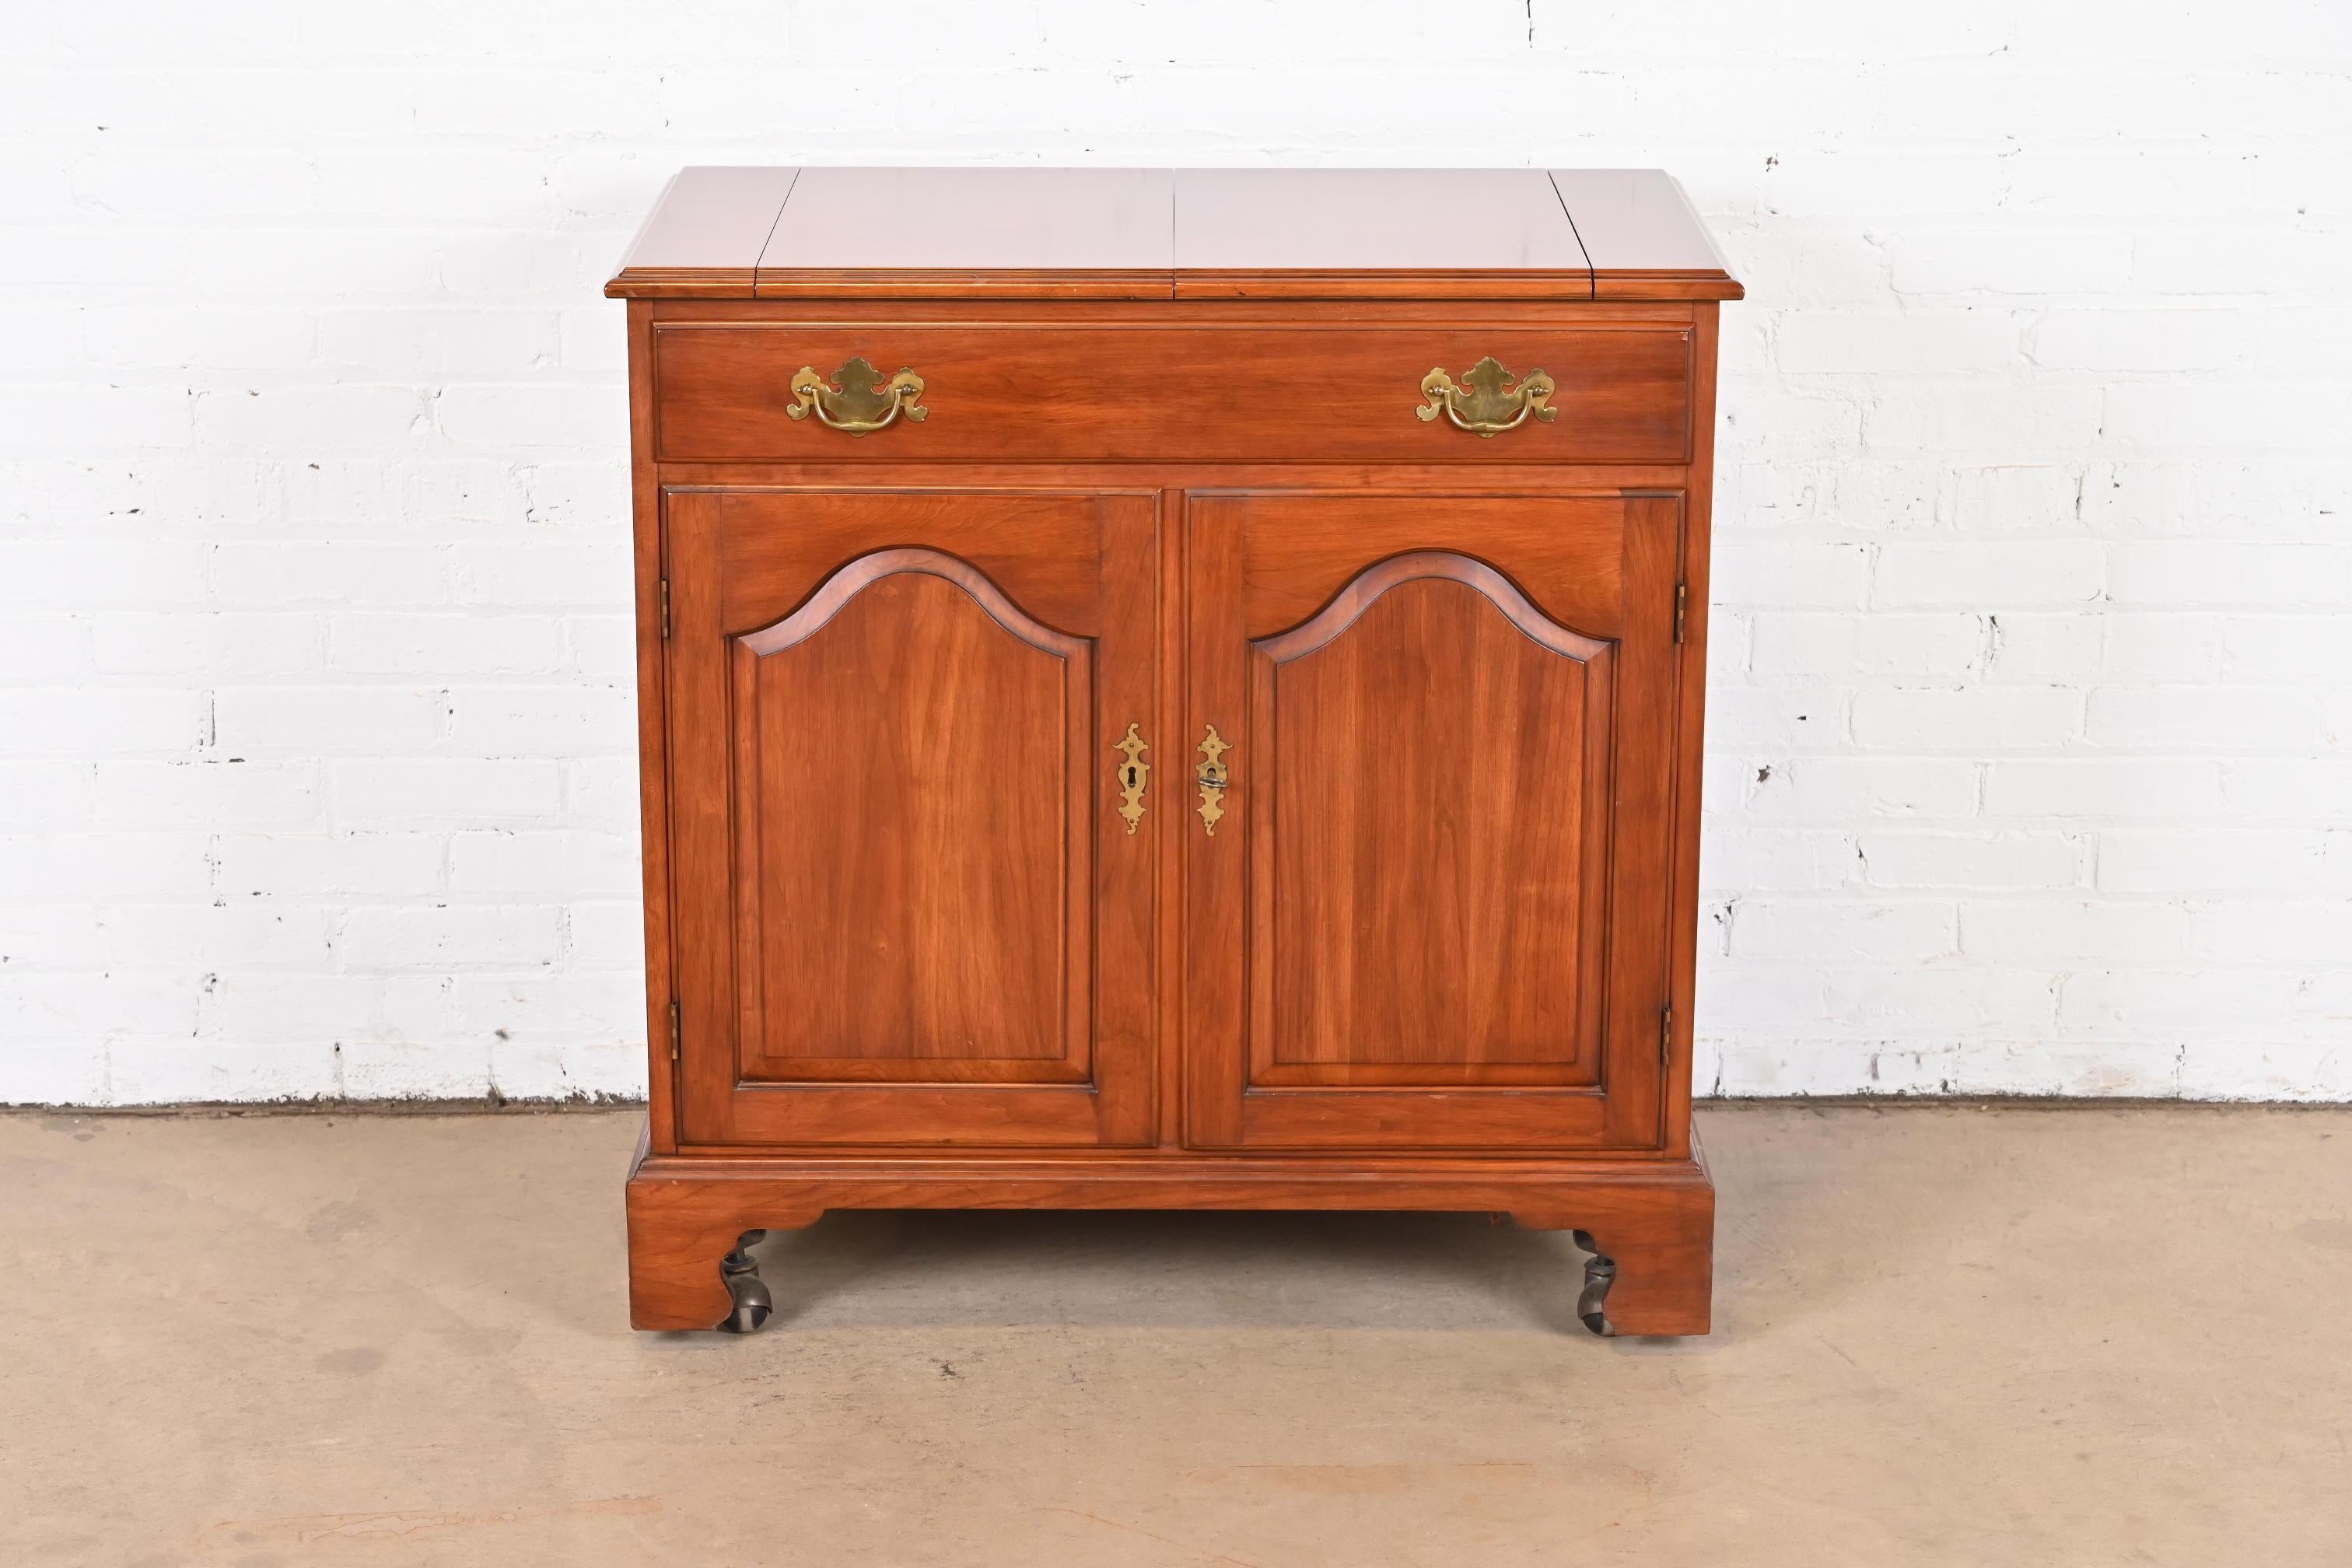 A gorgeous American Colonial or Chippendale style flip-top rolling bar cabinet

By Henkel Harris

USA, 1971

Solid wild black cherry wood, with original brass hardware. Cabinet locks, and key is included.

Measures: 34.38